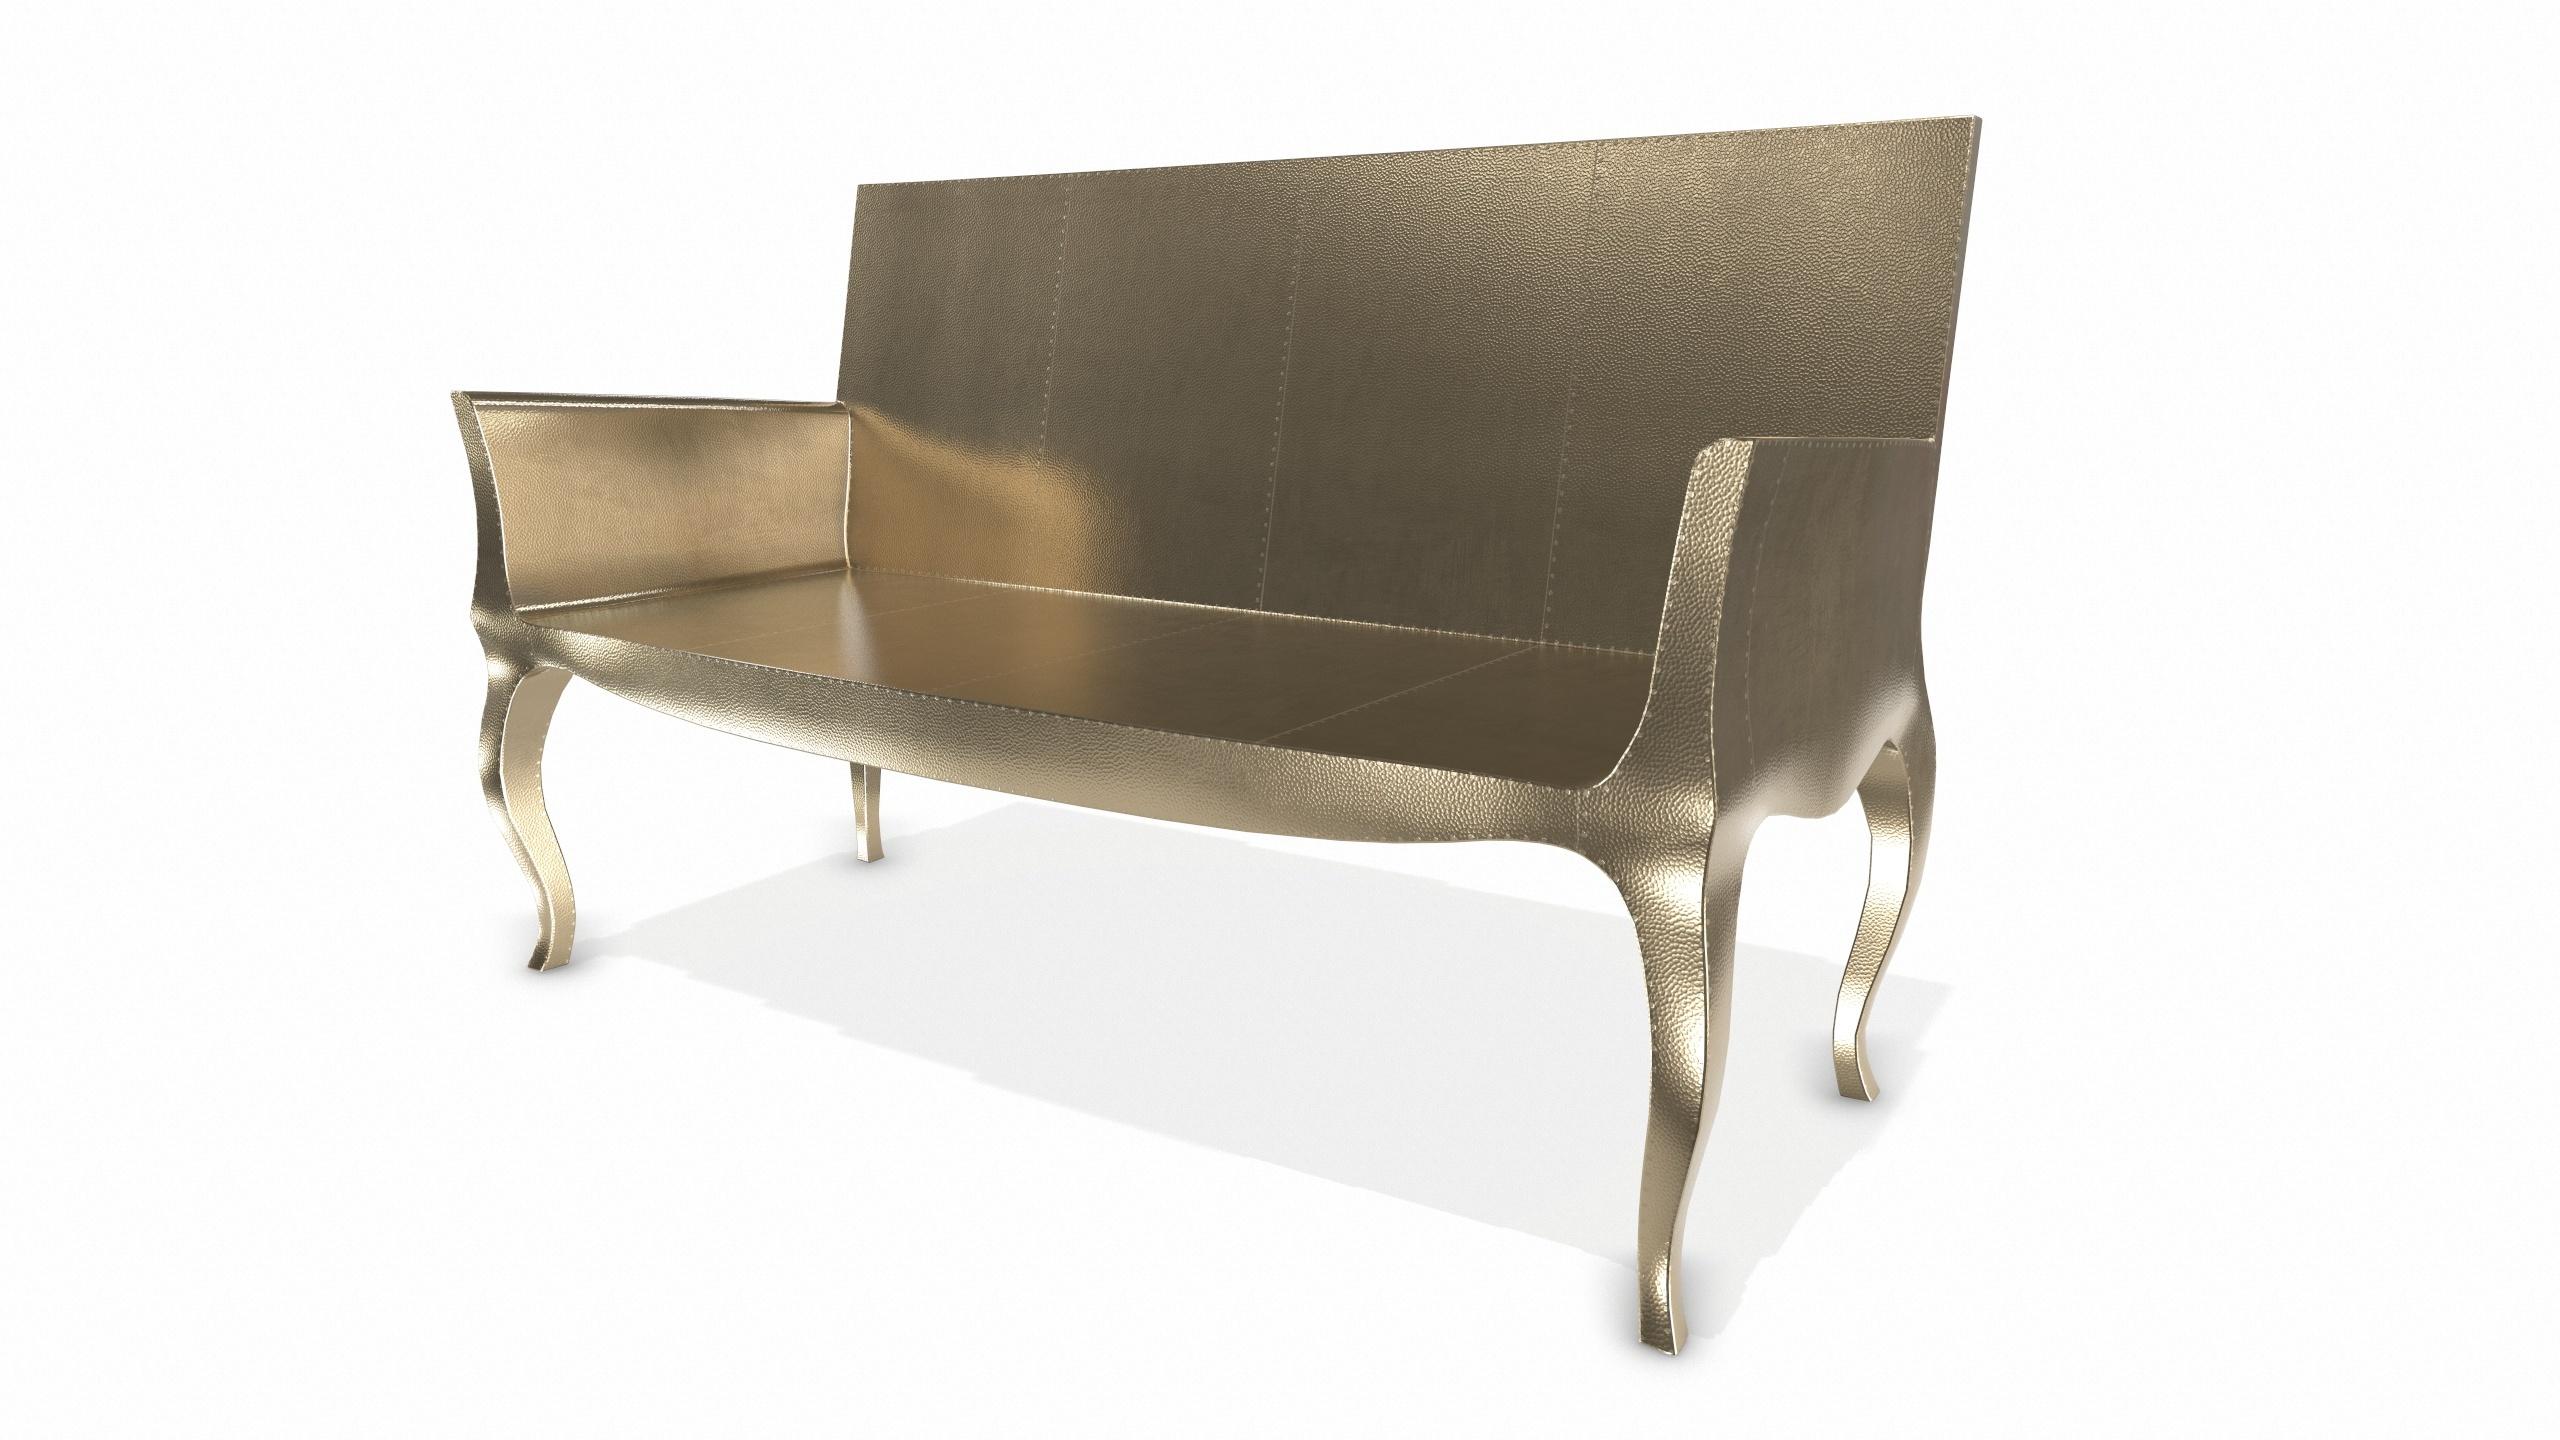 American Louise Settee Art Deco Living Room Sets in Mid. Hammered Brass by Paul Mathieu For Sale